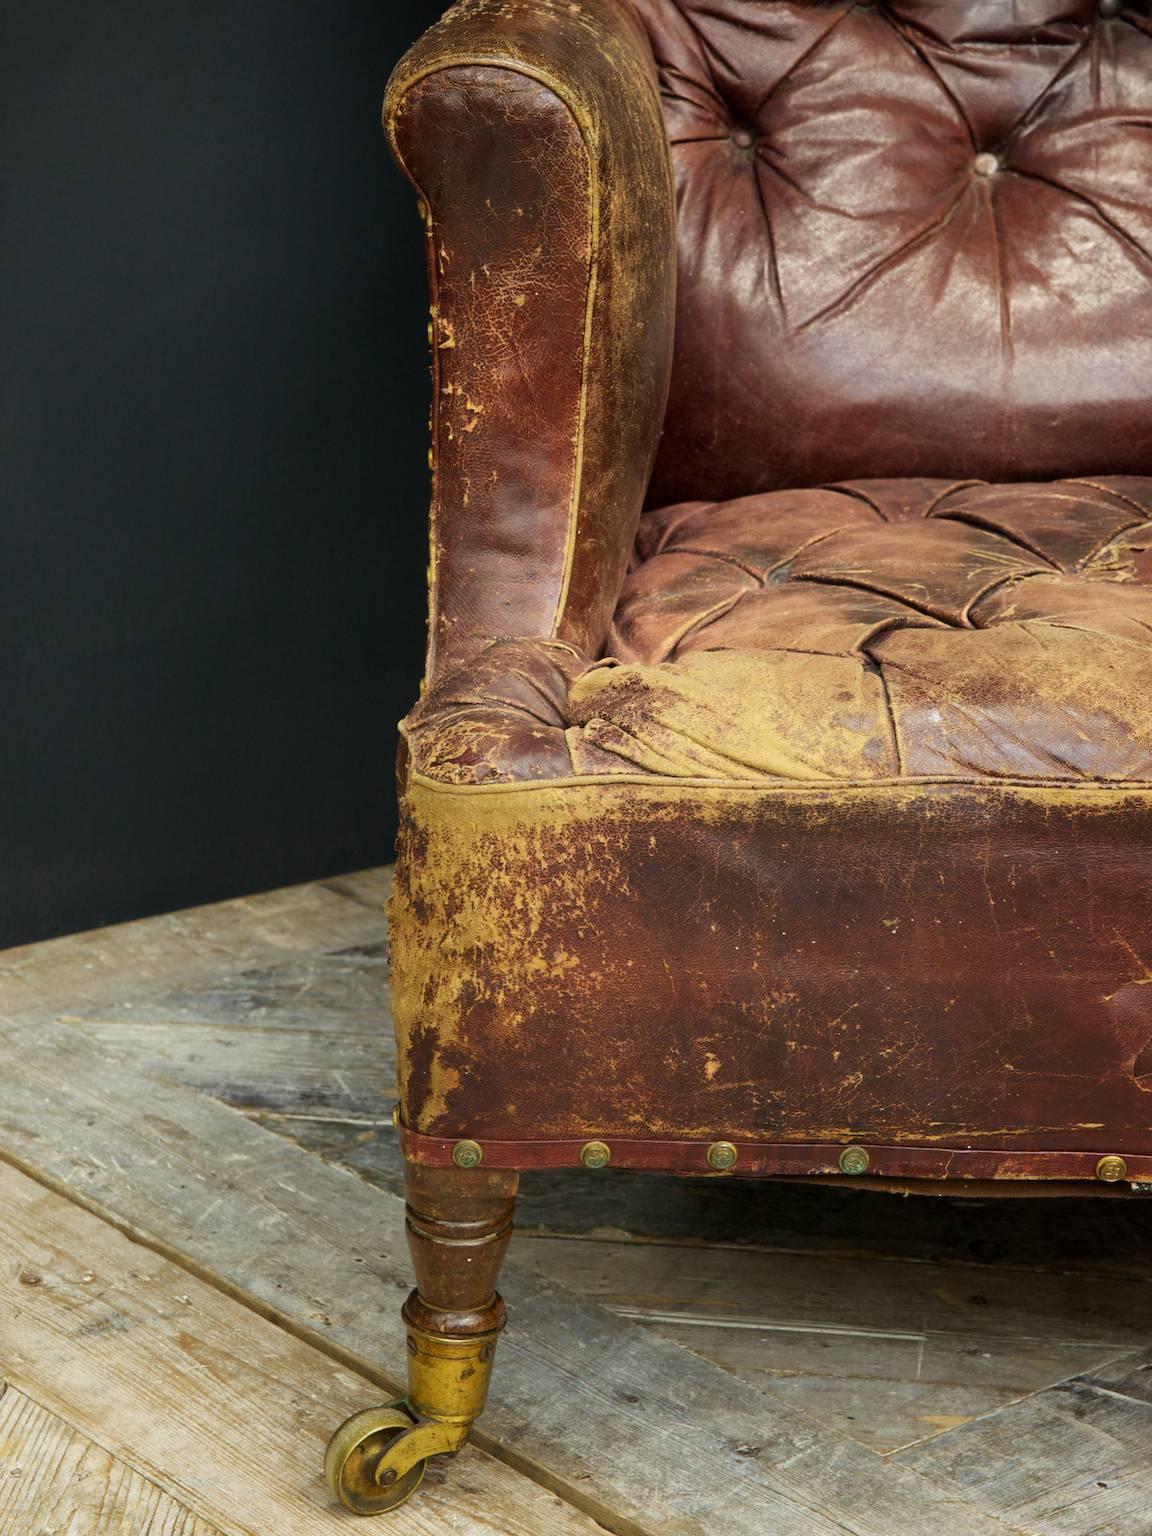 Victorian Leather Armchair